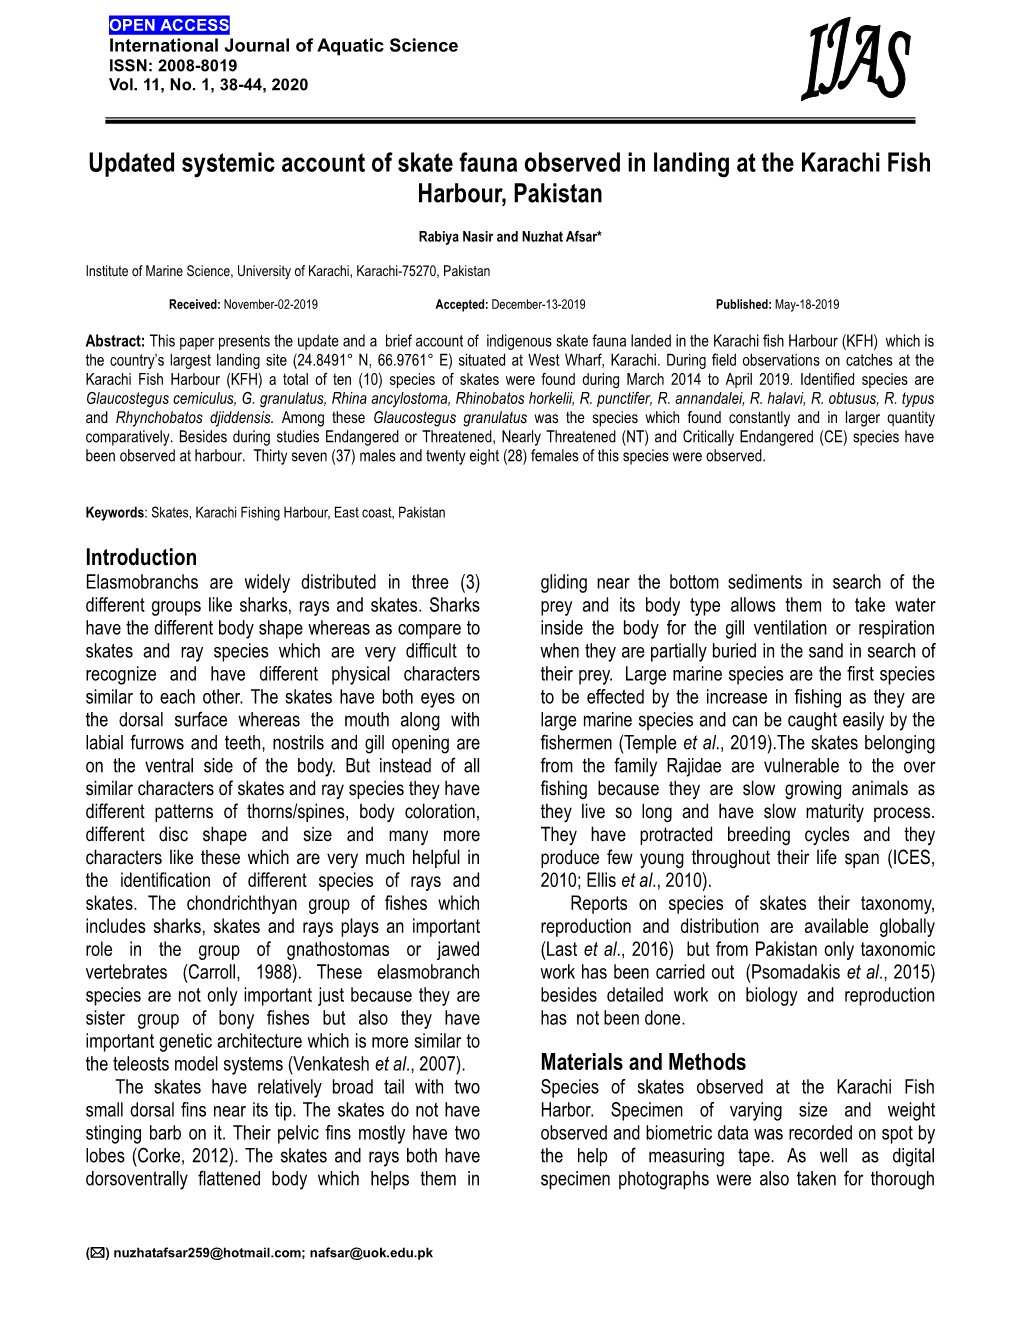 Updated Systemic Account of Skate Fauna Observed in Landing at the Karachi Fish Harbour, Pakistan